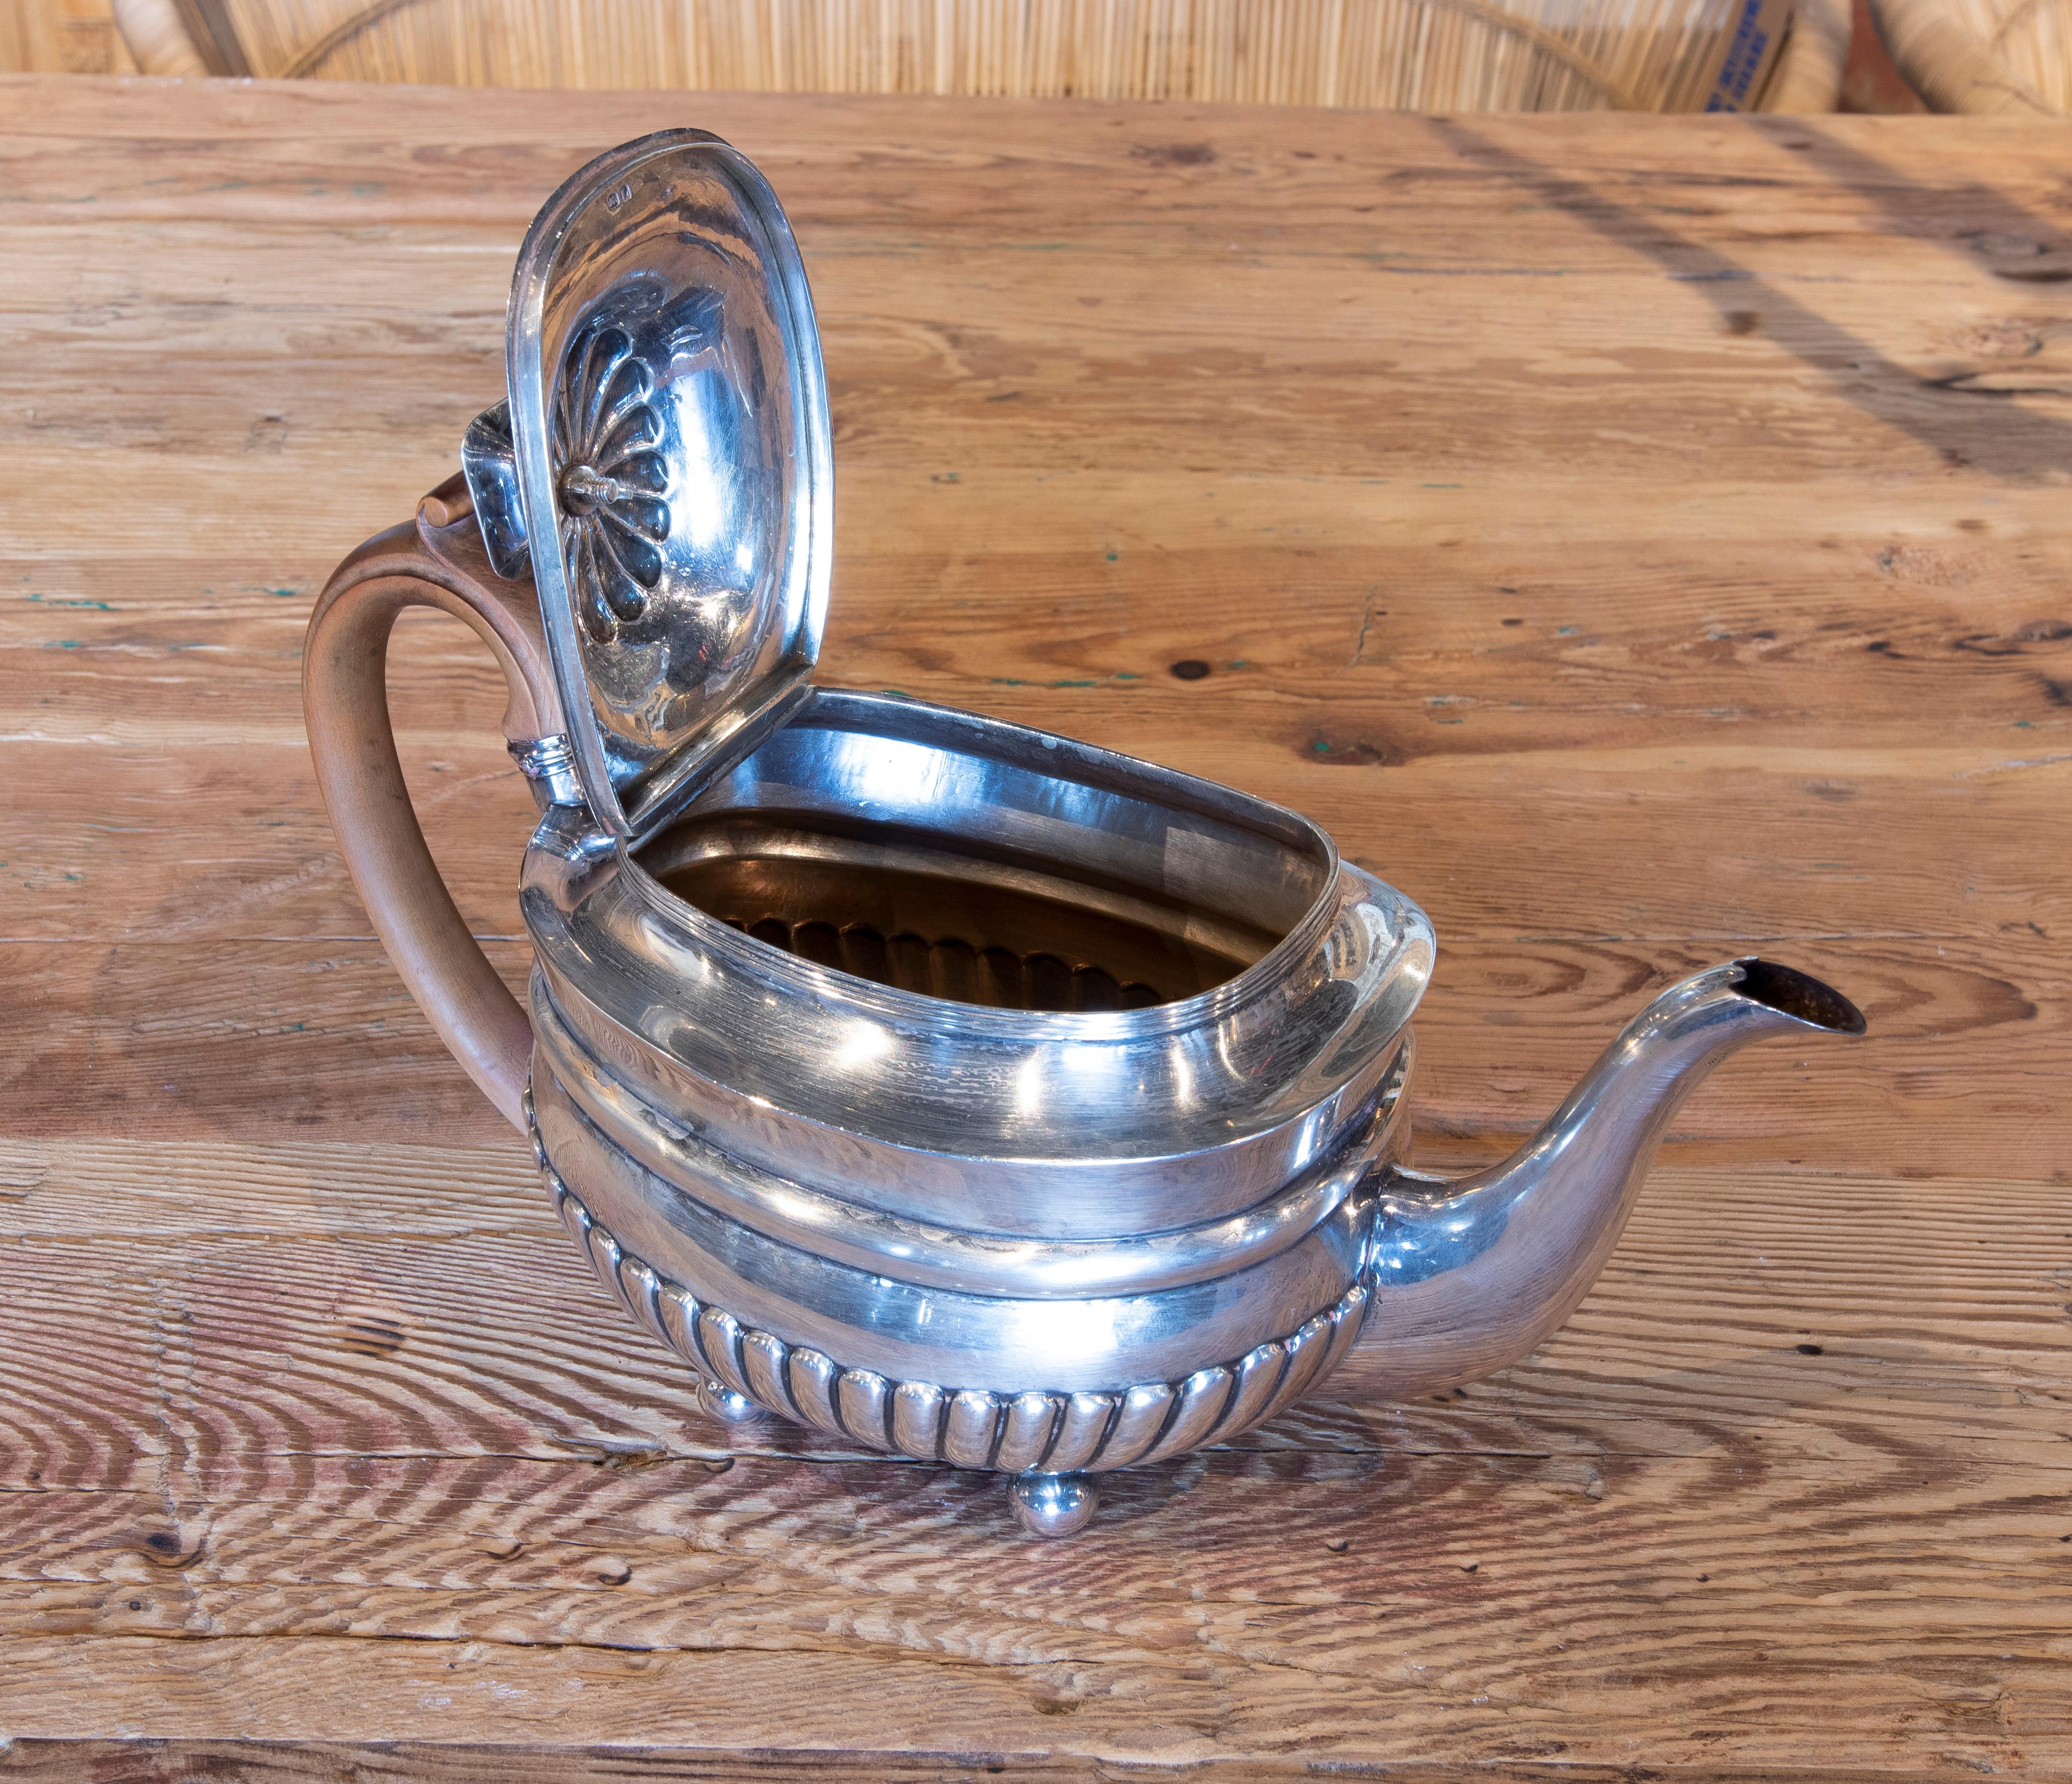 19th century English silver teapot with English wooden lid and handle.